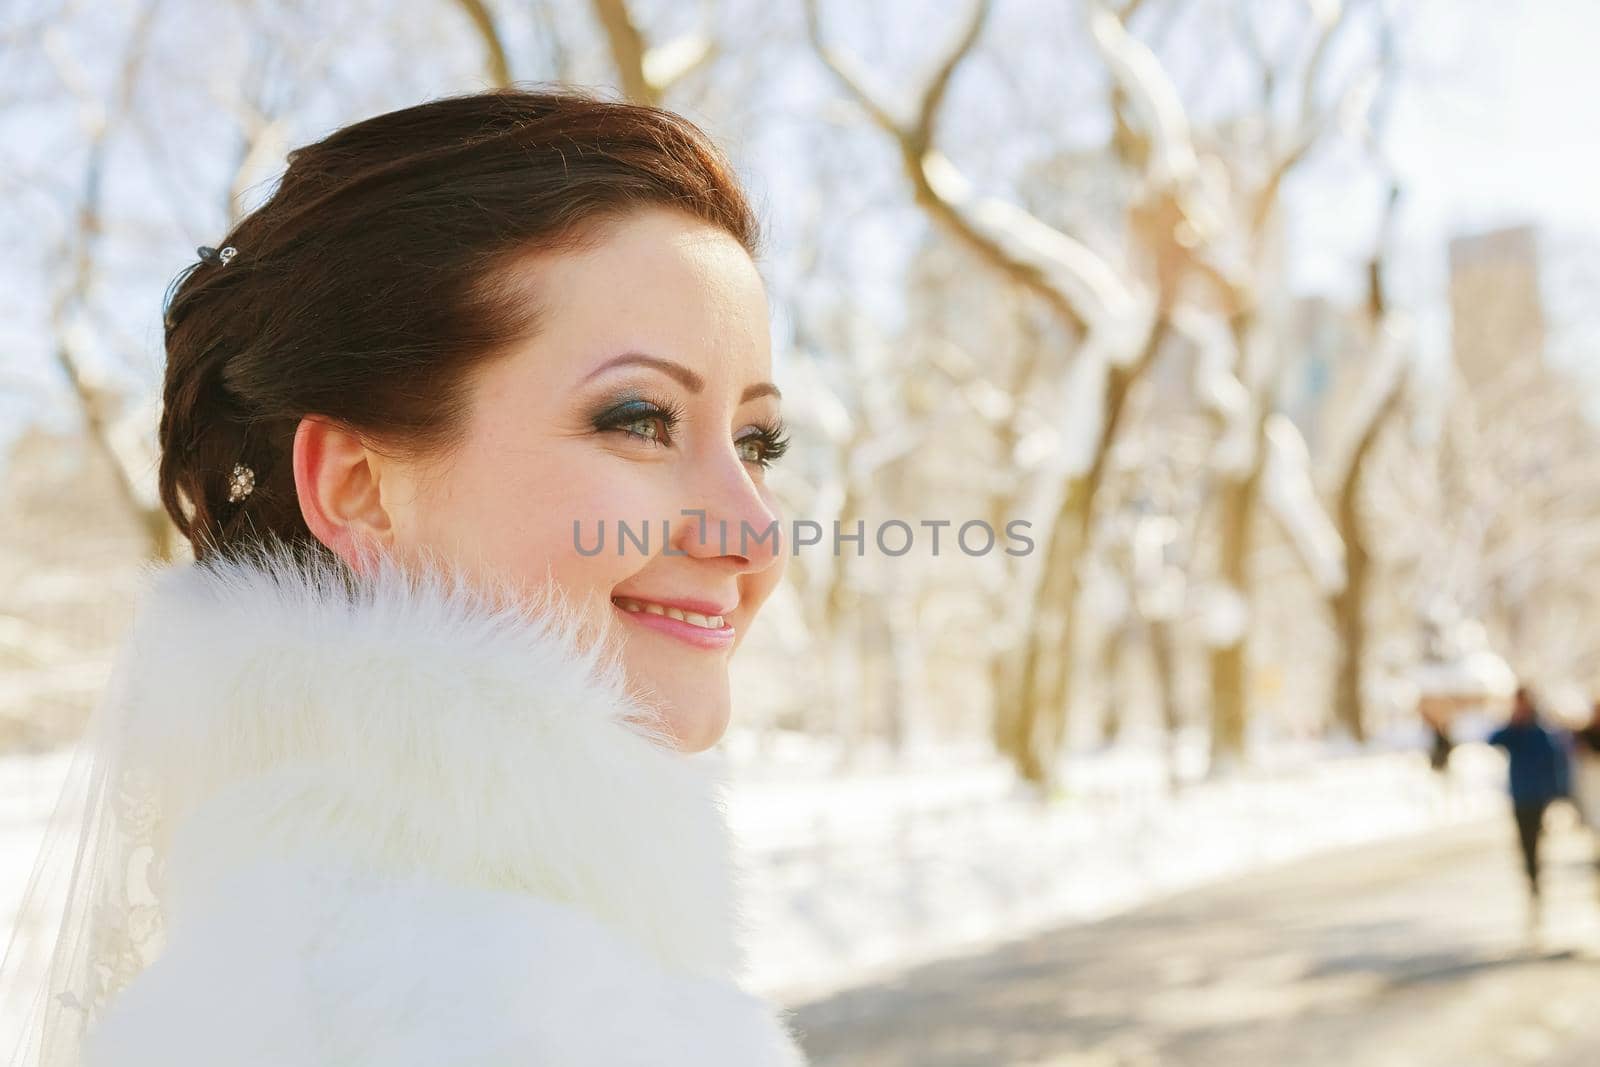 Wedding photo session in a snowy Park. by ungvar